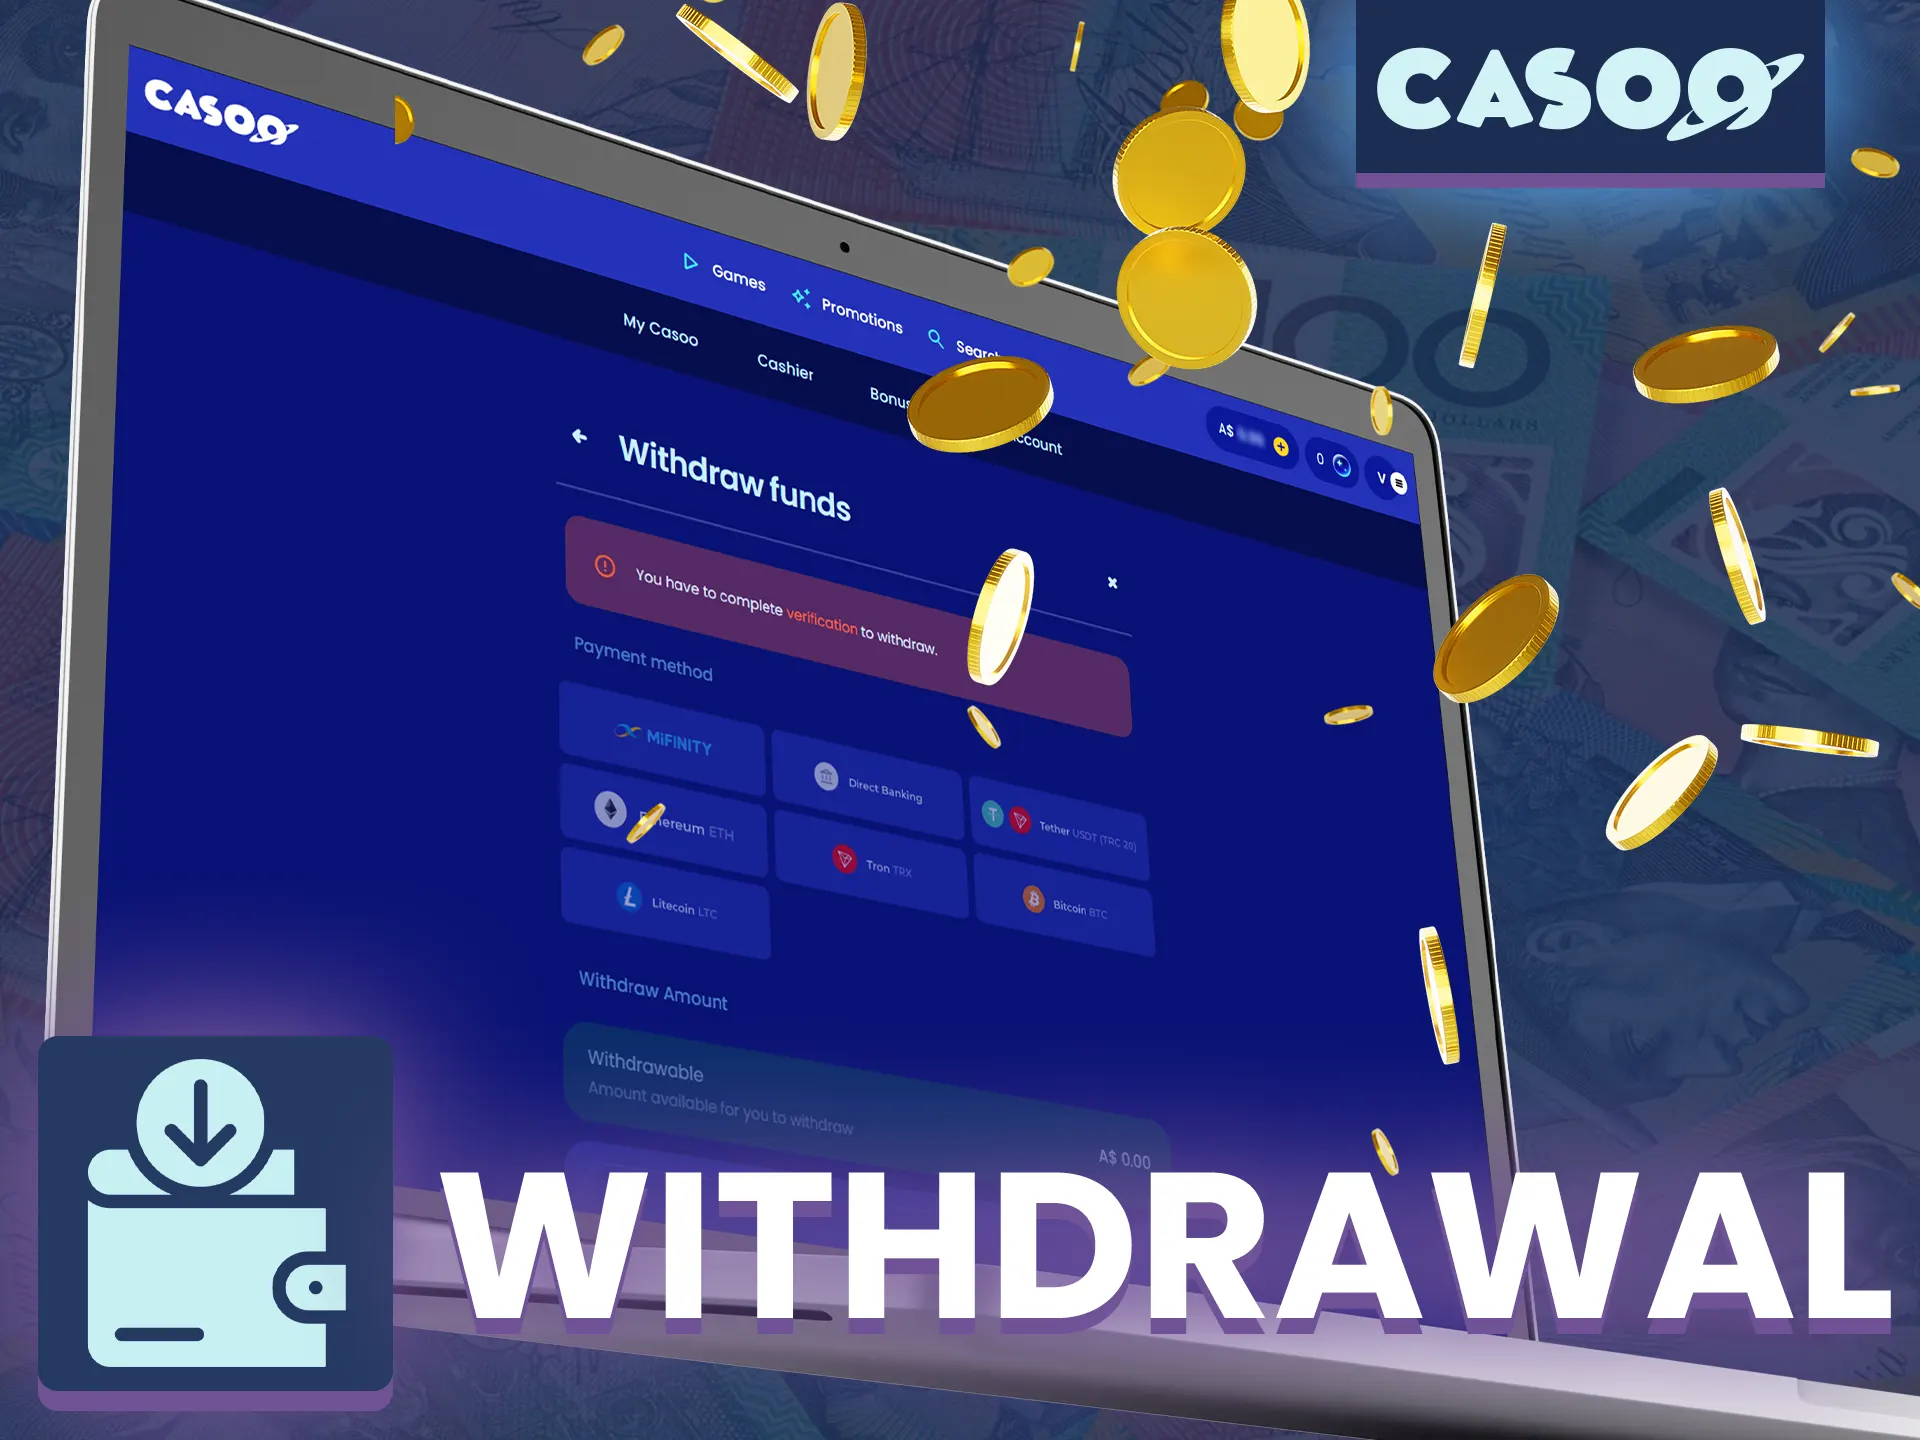 You can make a withdrawal request from Casoo Casino at any time.